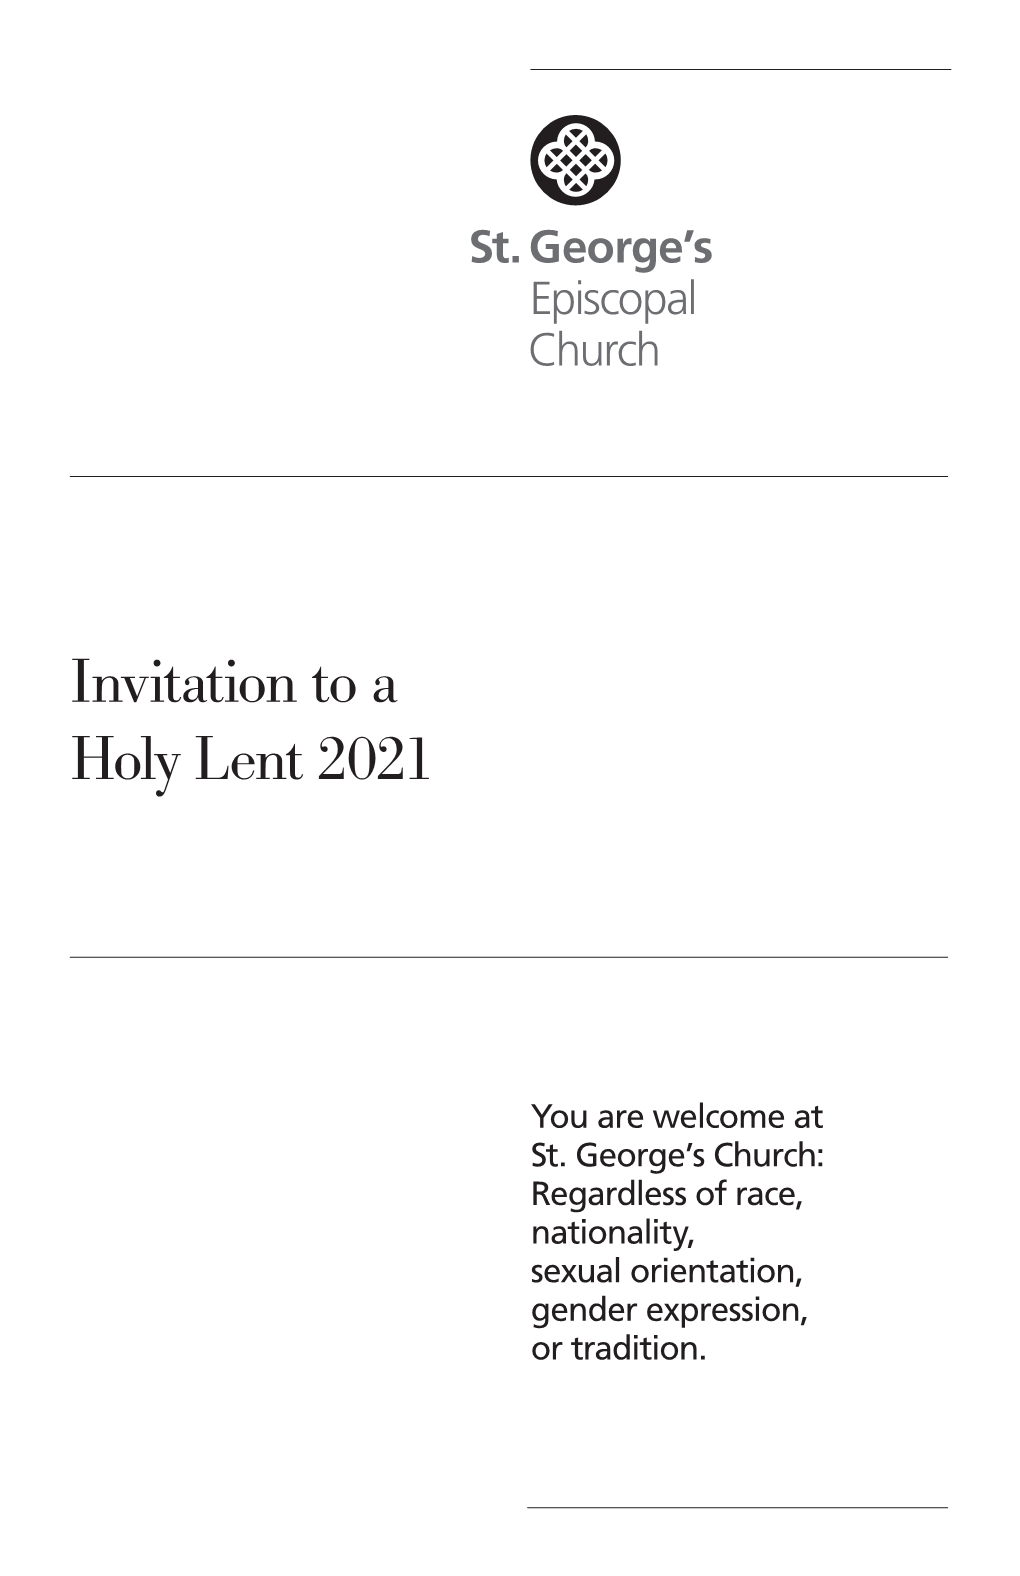 Invitation to a Holy Lent 2021